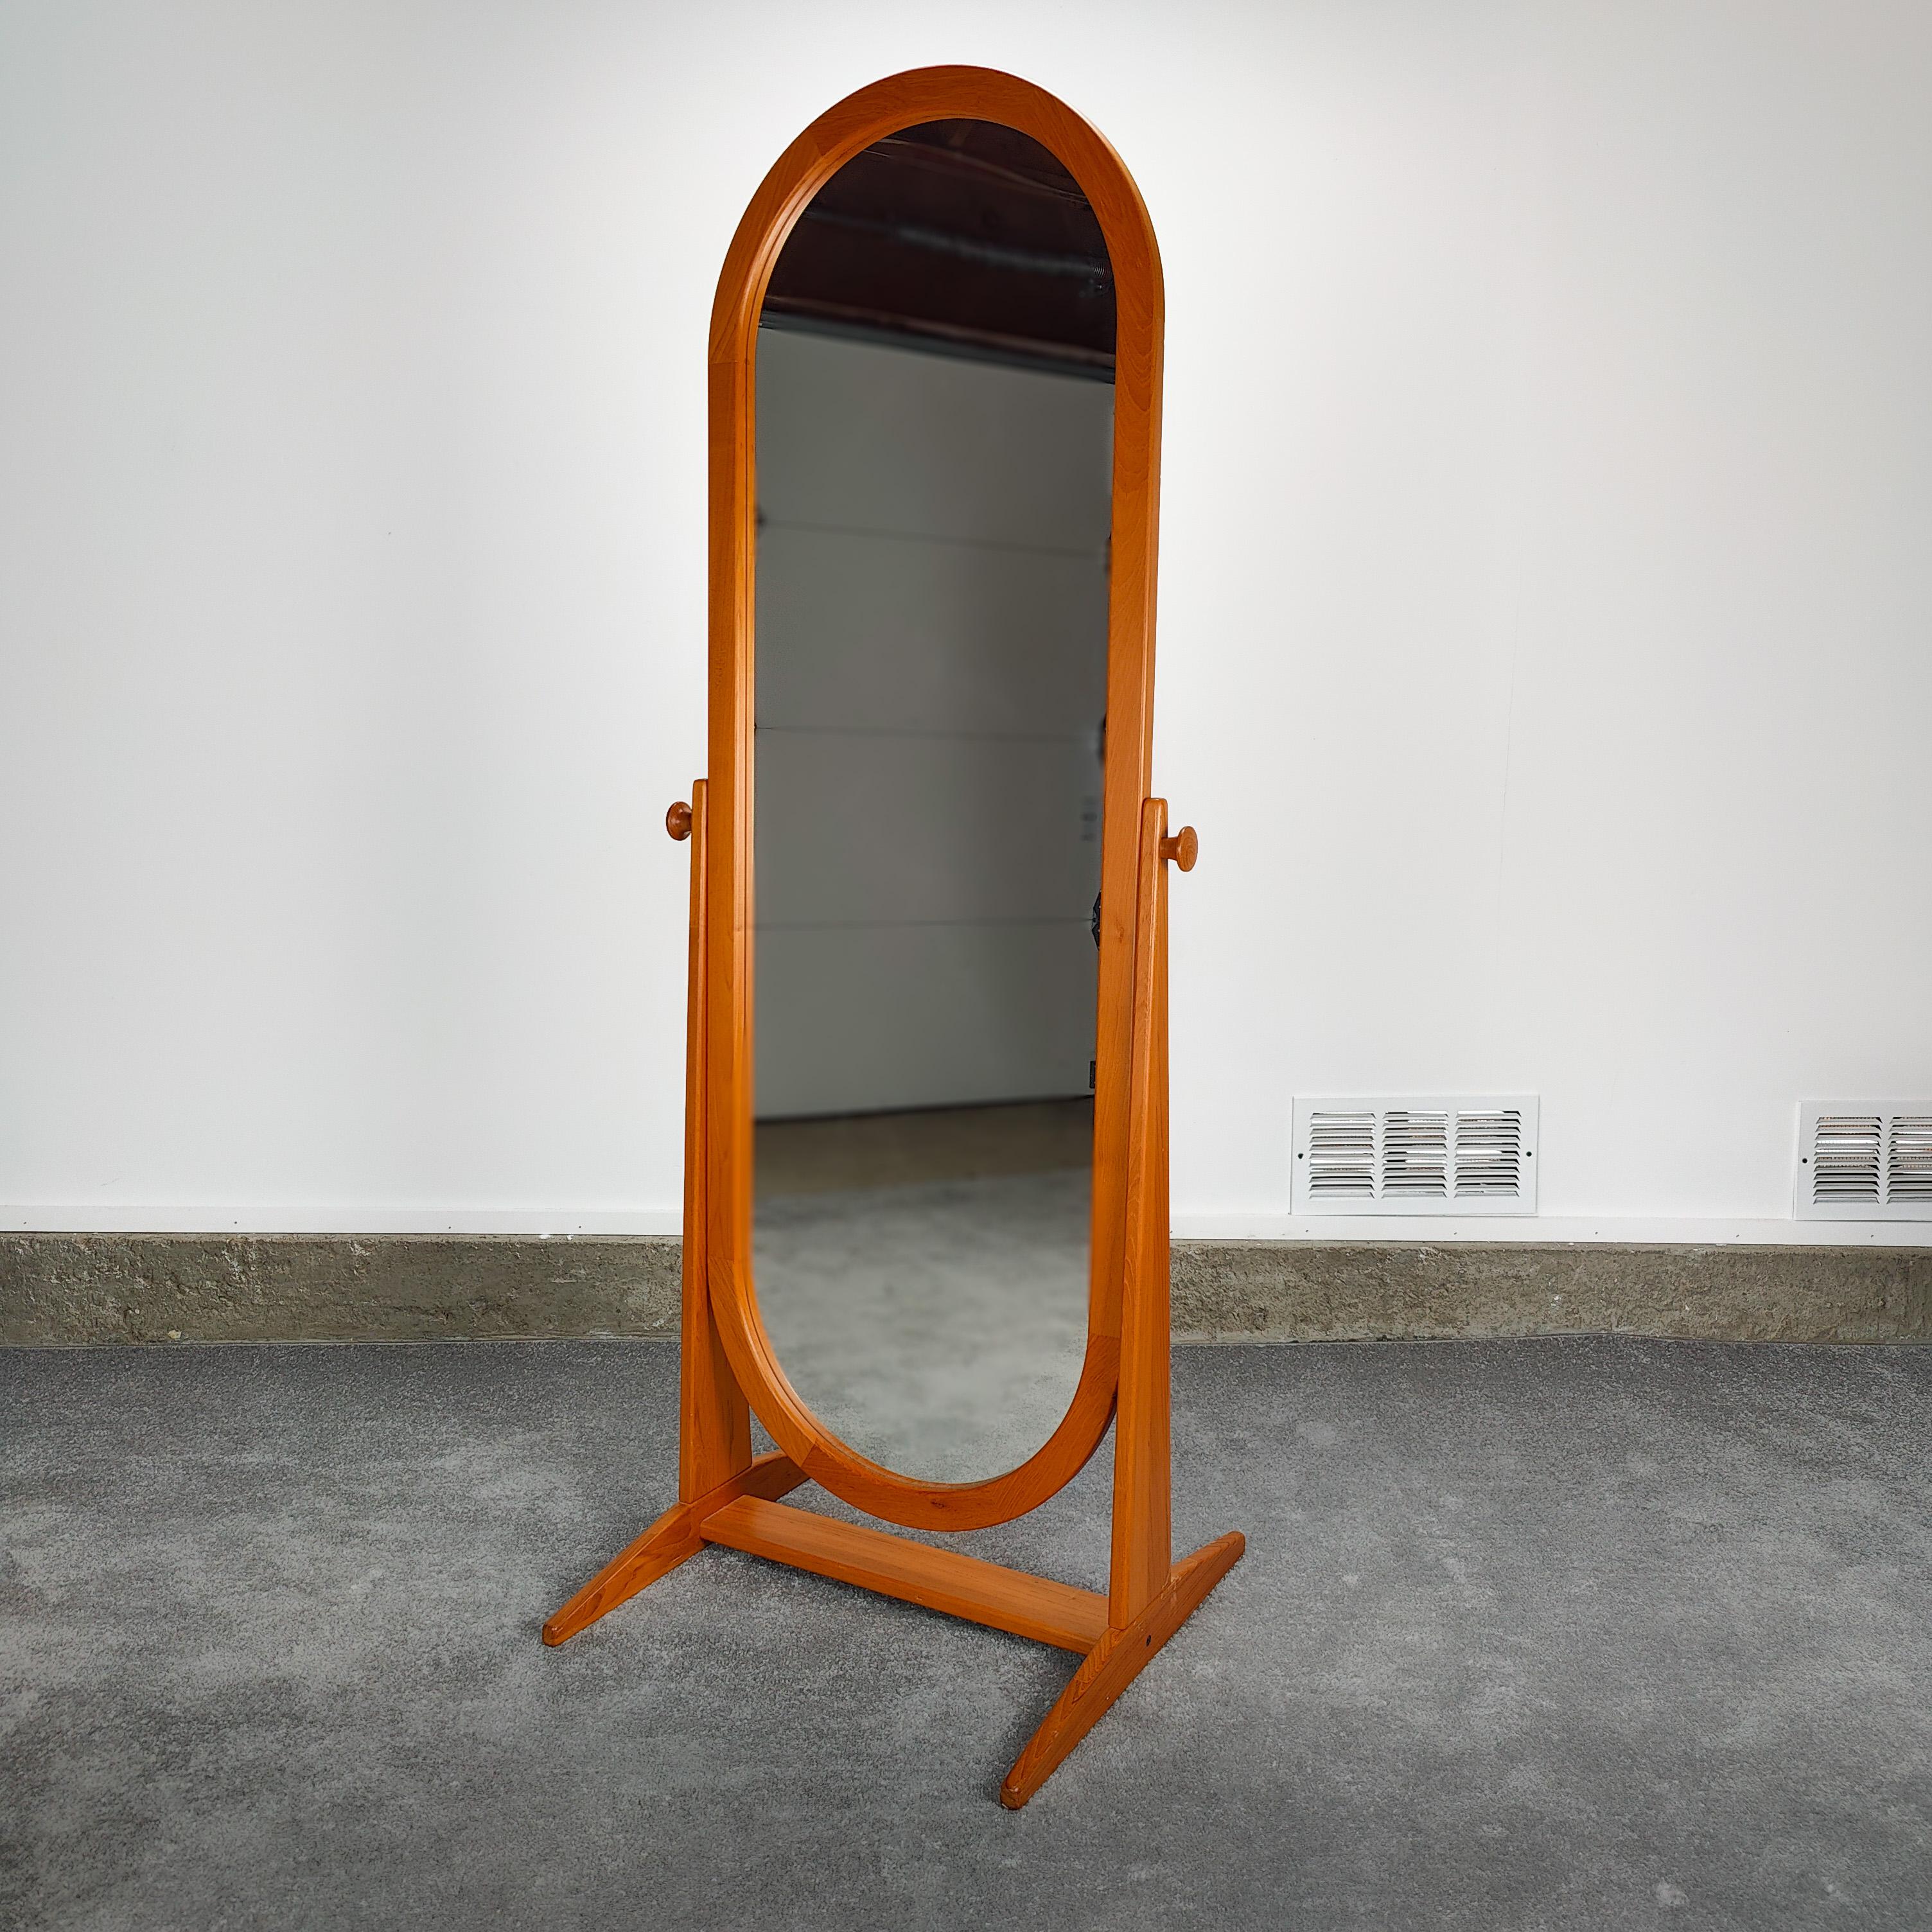 Just in, an amazing full length cheval mirror by Pedersen & Hansen from Denmark. The build and quality of this mirror is superb with adjusting knobs to angle the mirror to your liking. Also features an elongated mirror. Would pair well in any mid